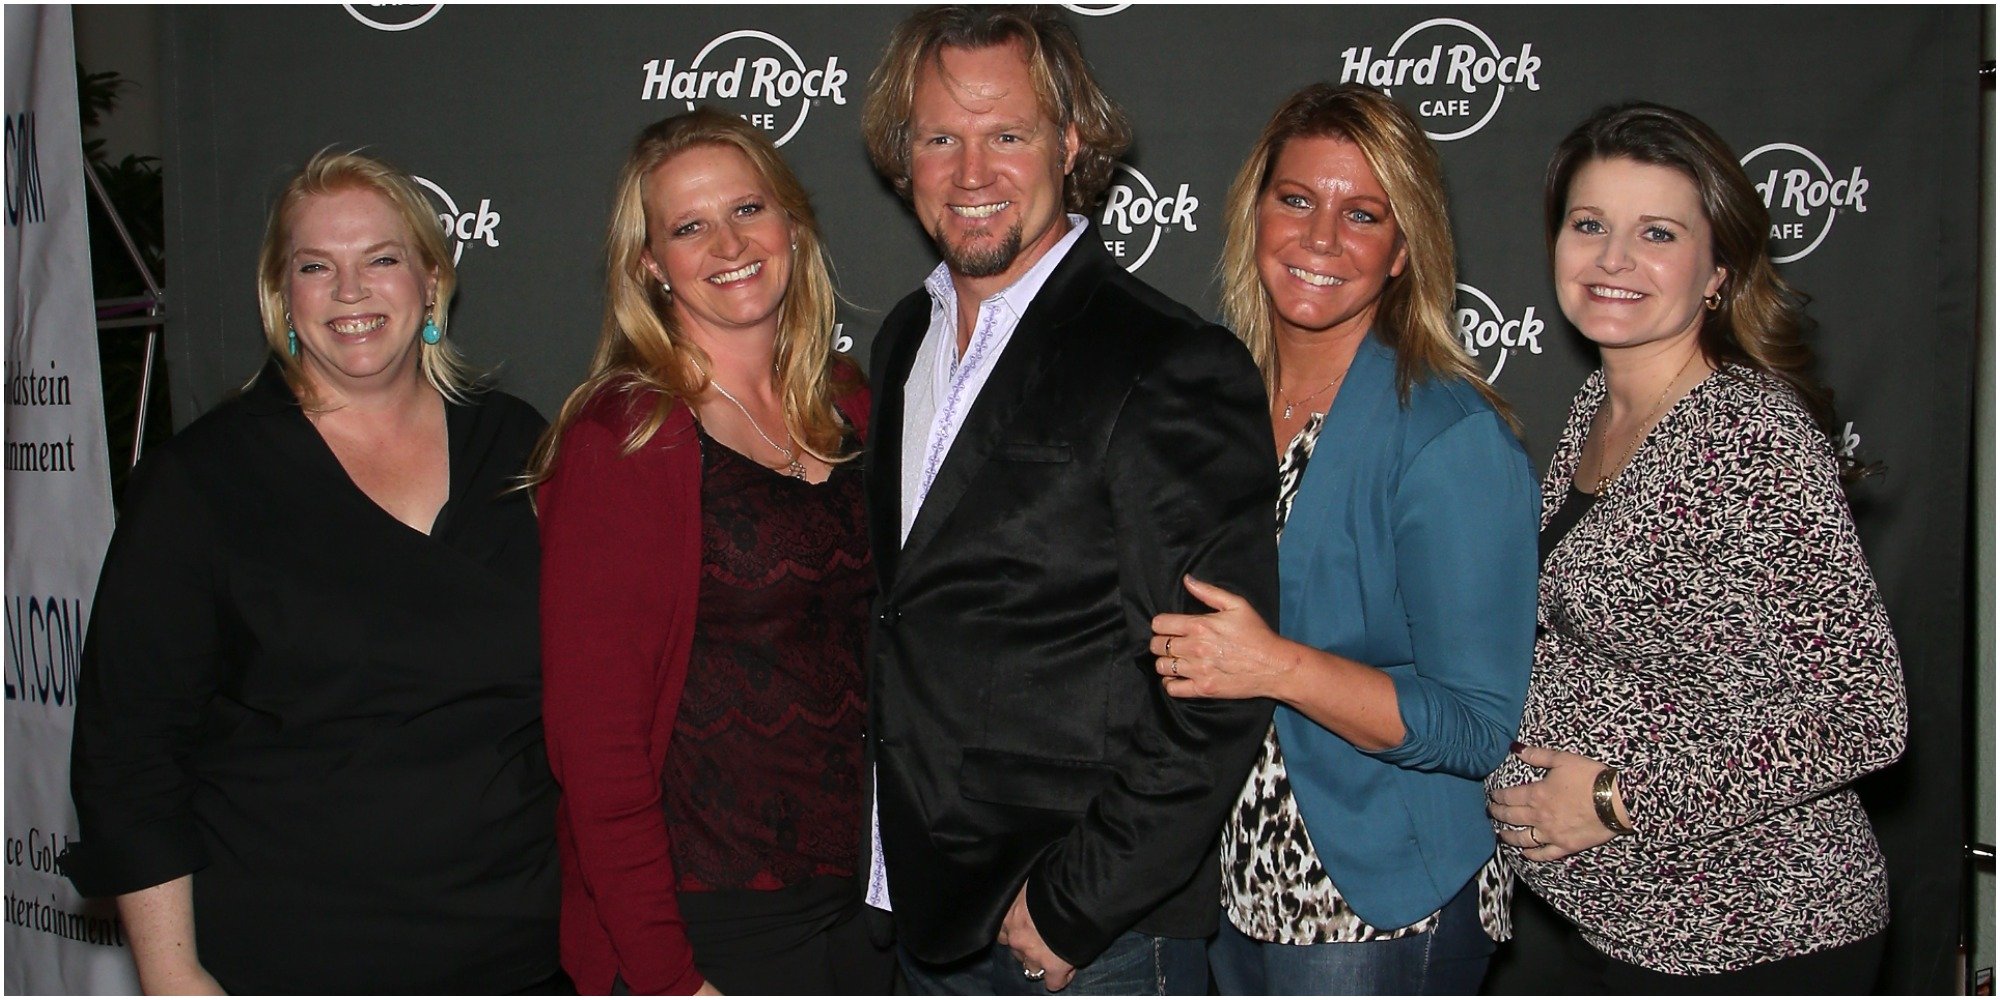 The cast of "Sister Wives" includes Janelle, Christine, Kody, Meri, and Robyn Brown.